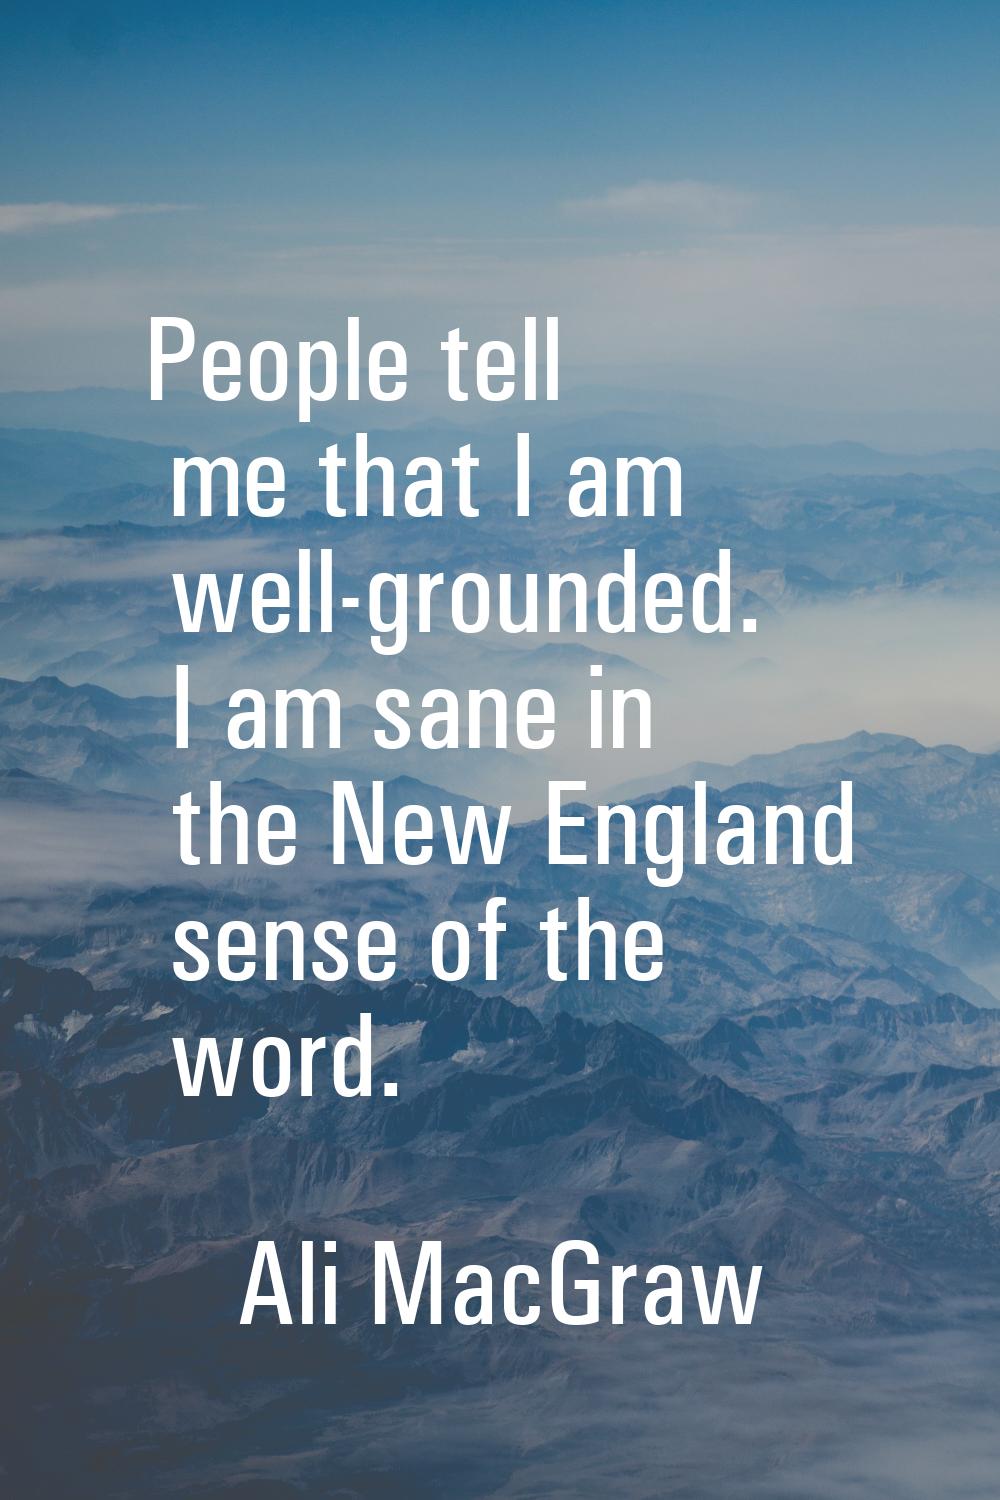 People tell me that I am well-grounded. I am sane in the New England sense of the word.